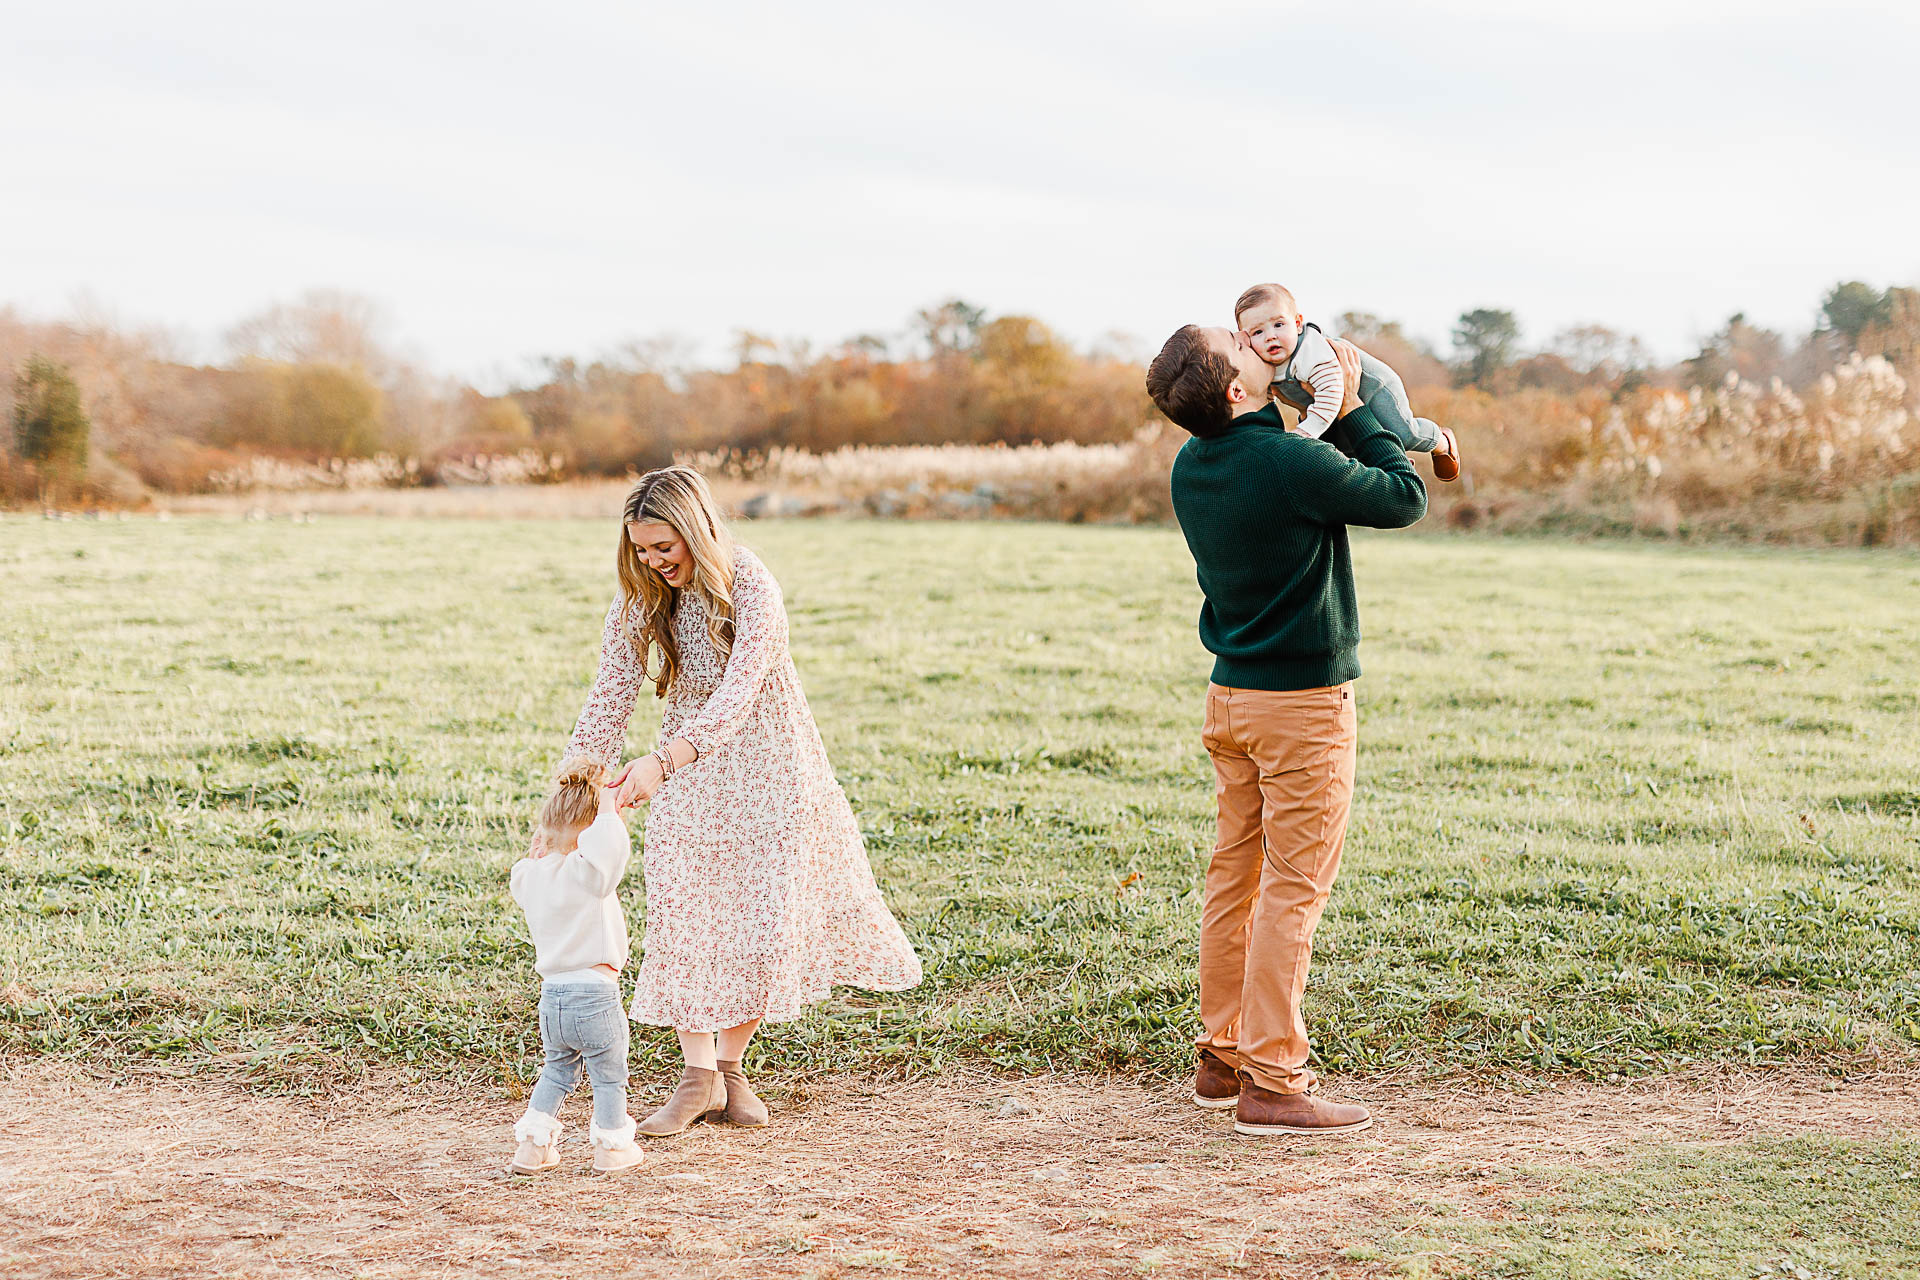 Photo by Hingham Family Photographer Christina Runnals | Family dancing in field